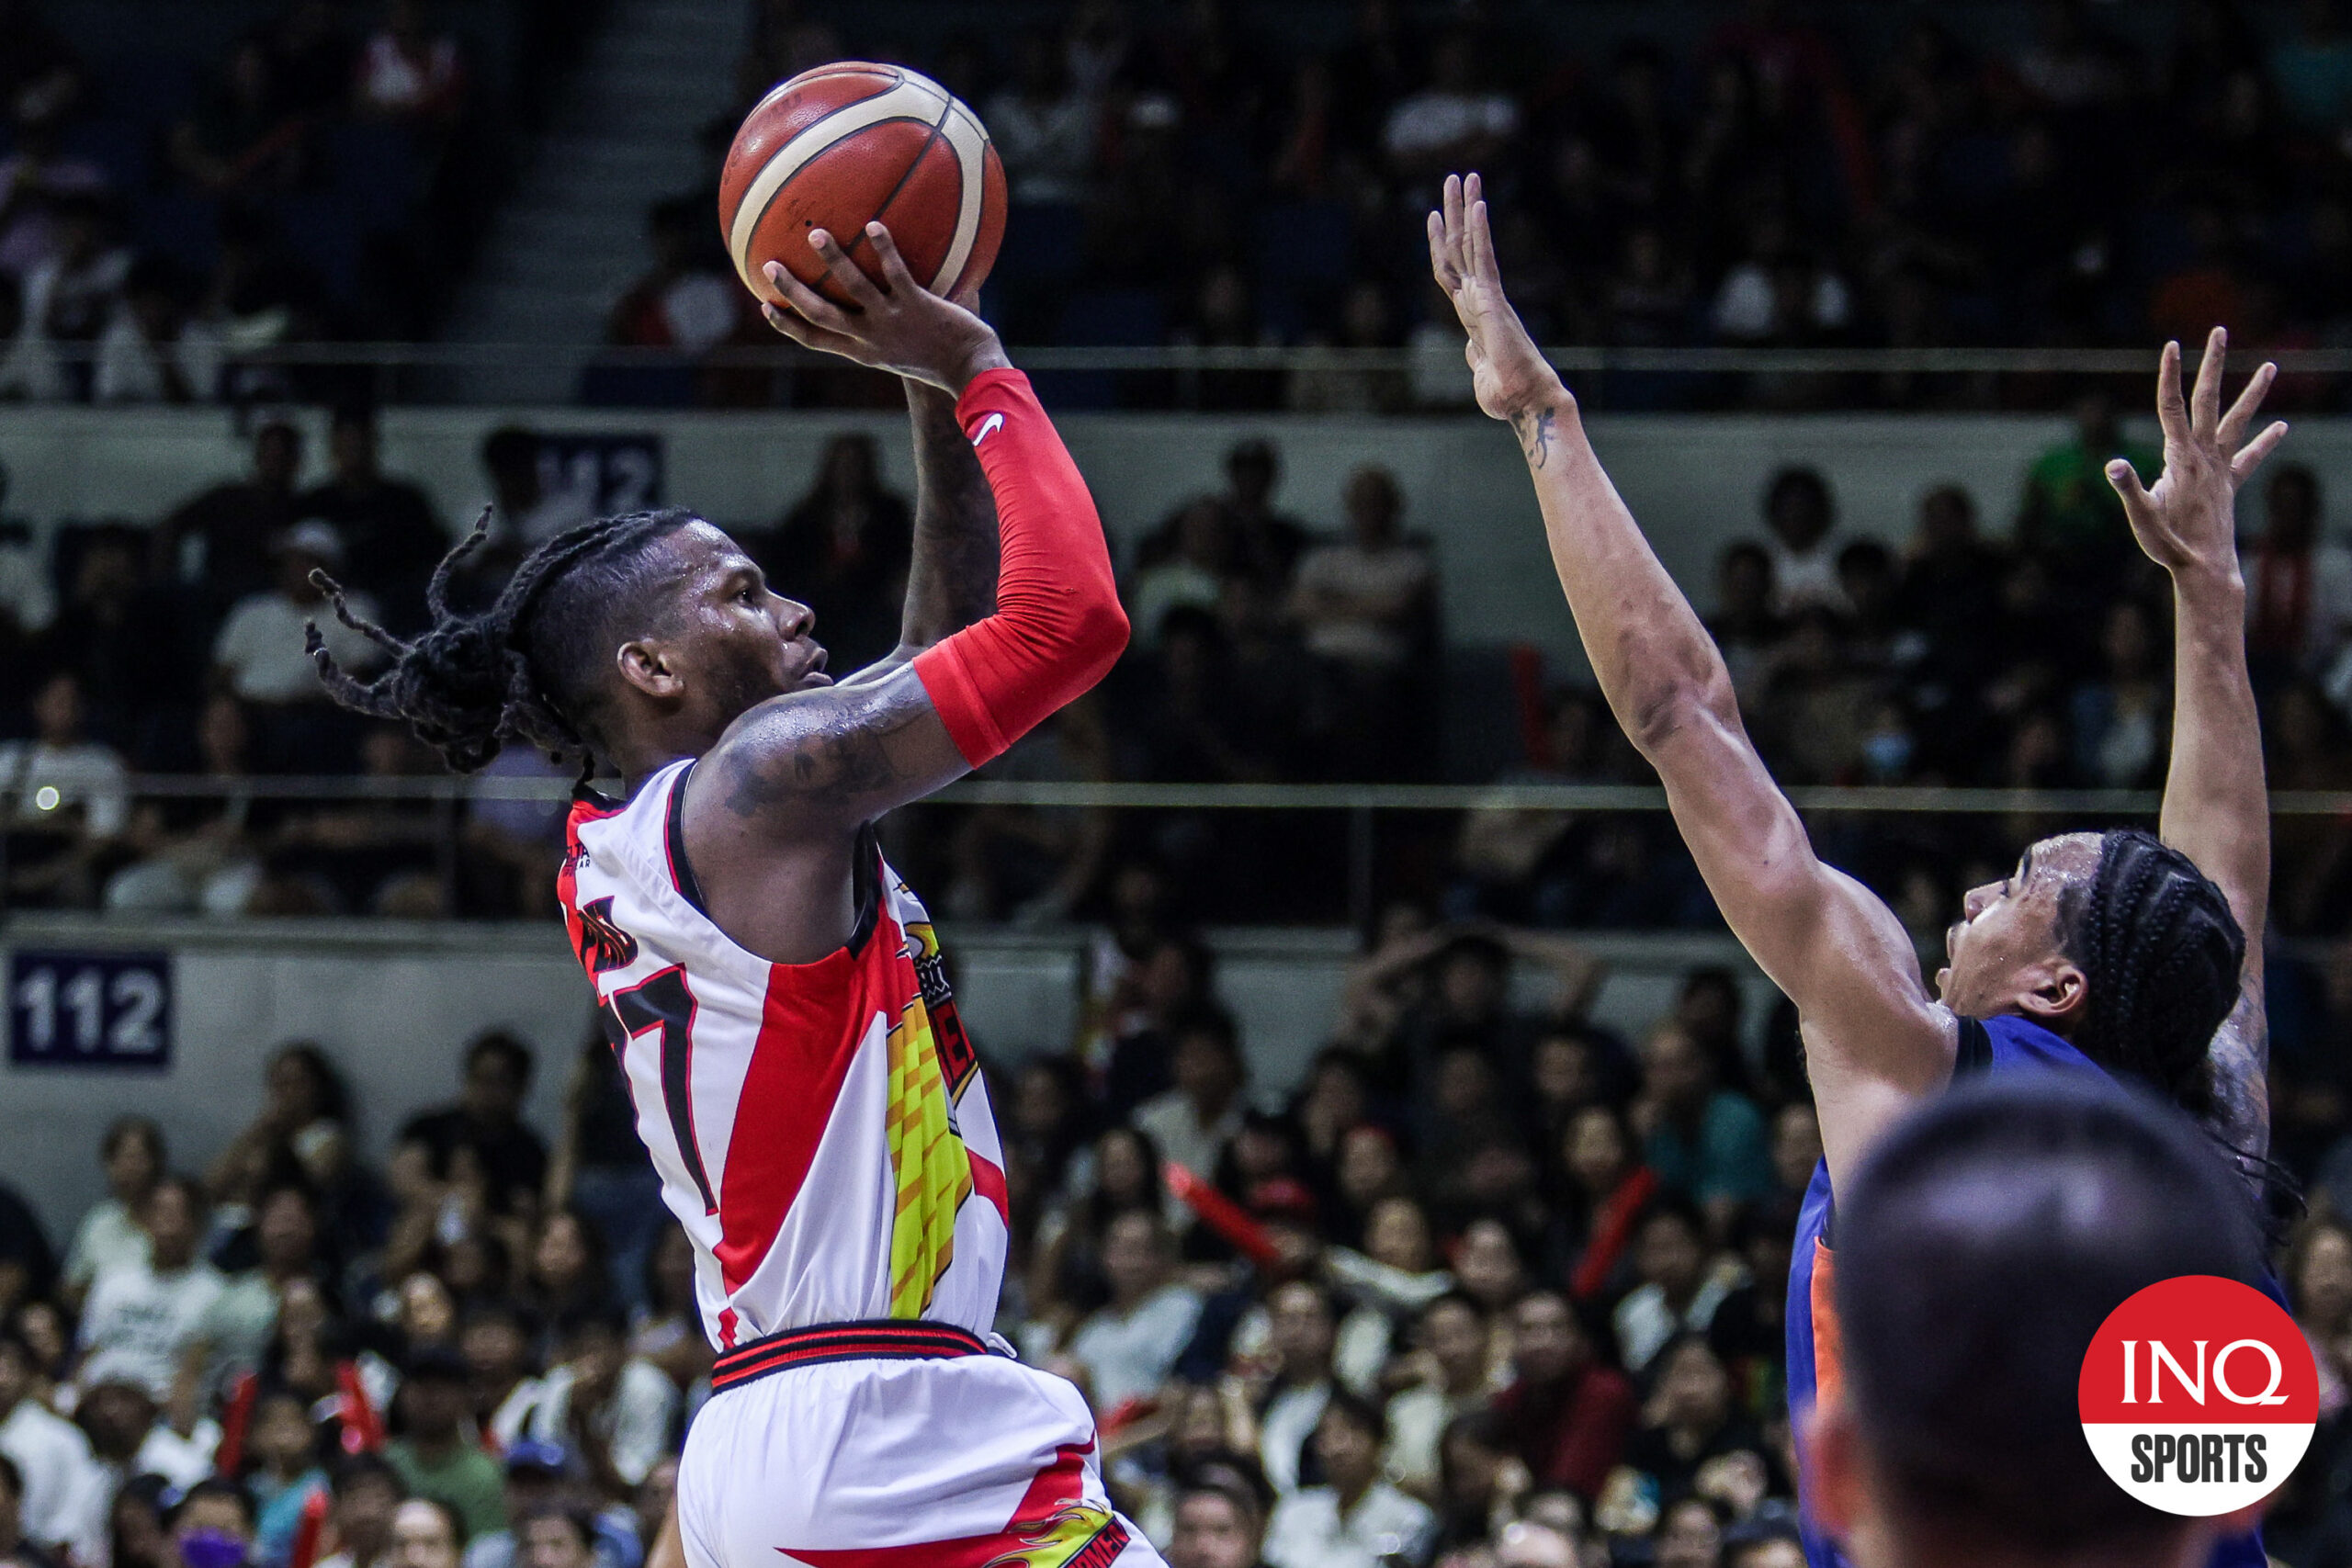 San Miguel Beermen's CJ Perez during Game 2 of the PBA Philippine Cup Finals against Meralco Bolts.